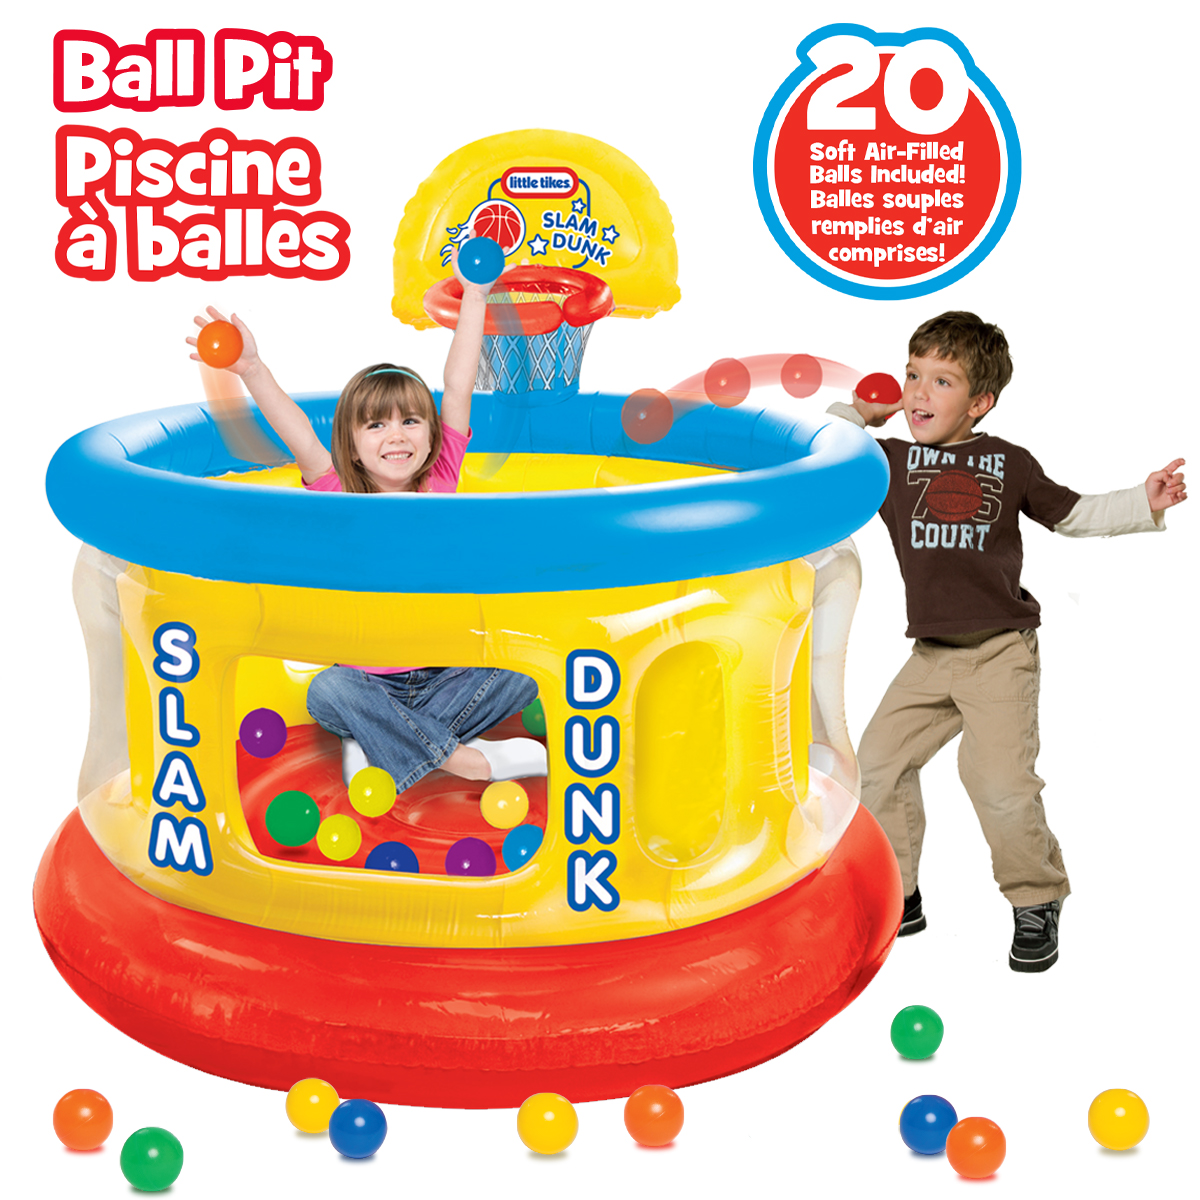 Little Tikes Slam Dunk Big Ball Pit, Inflatable Basketball Hoop and Balls for Kids Ages 3-6 - image 1 of 6